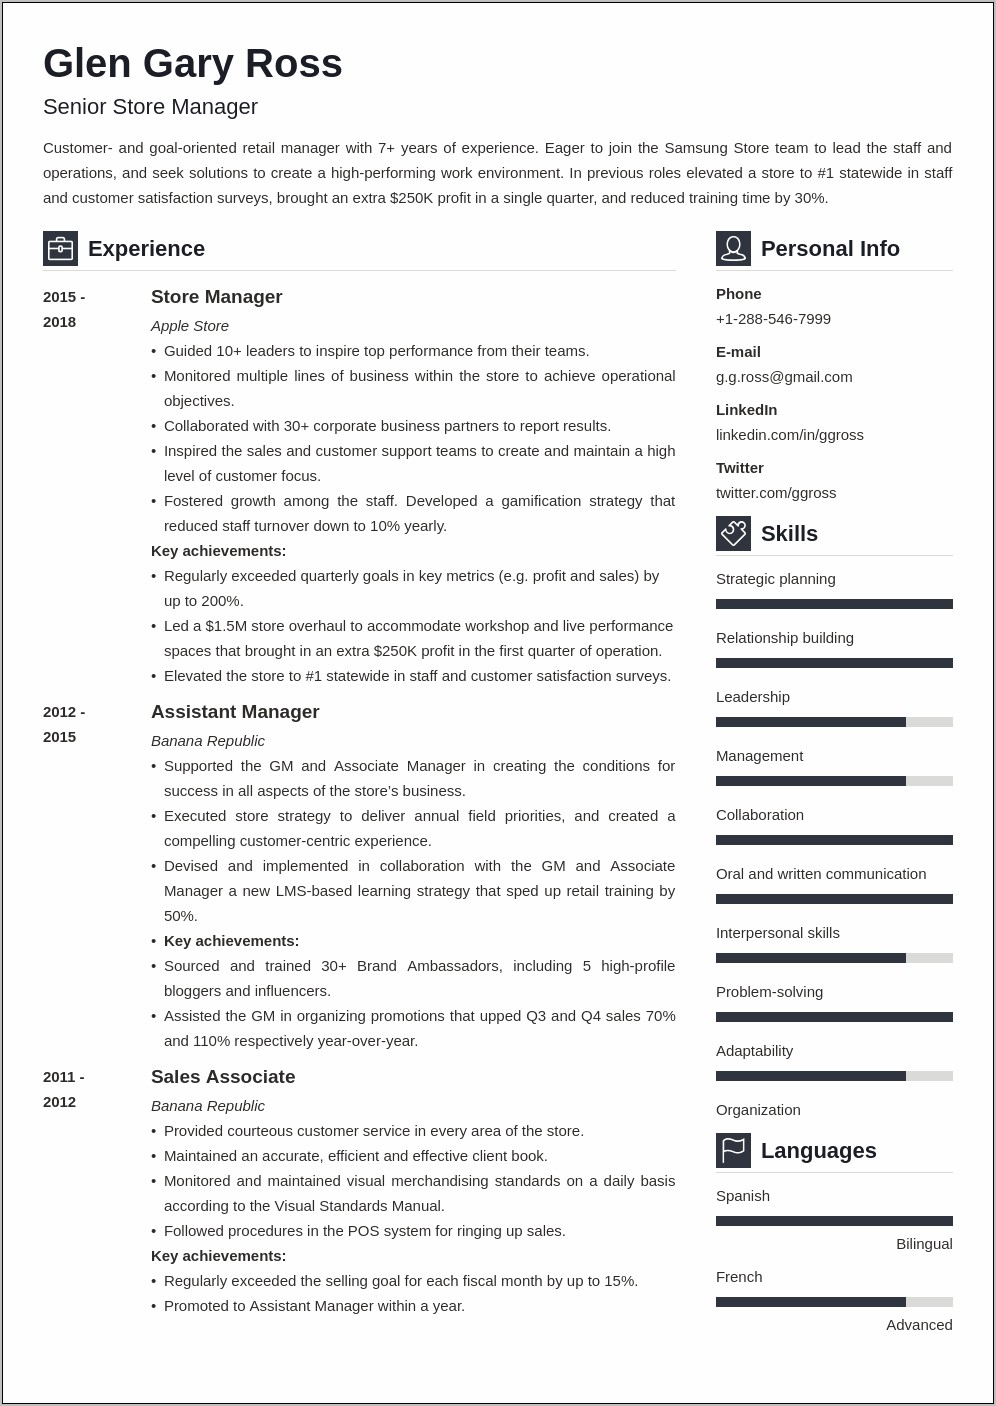 Resume Templates For Retail Management Positions